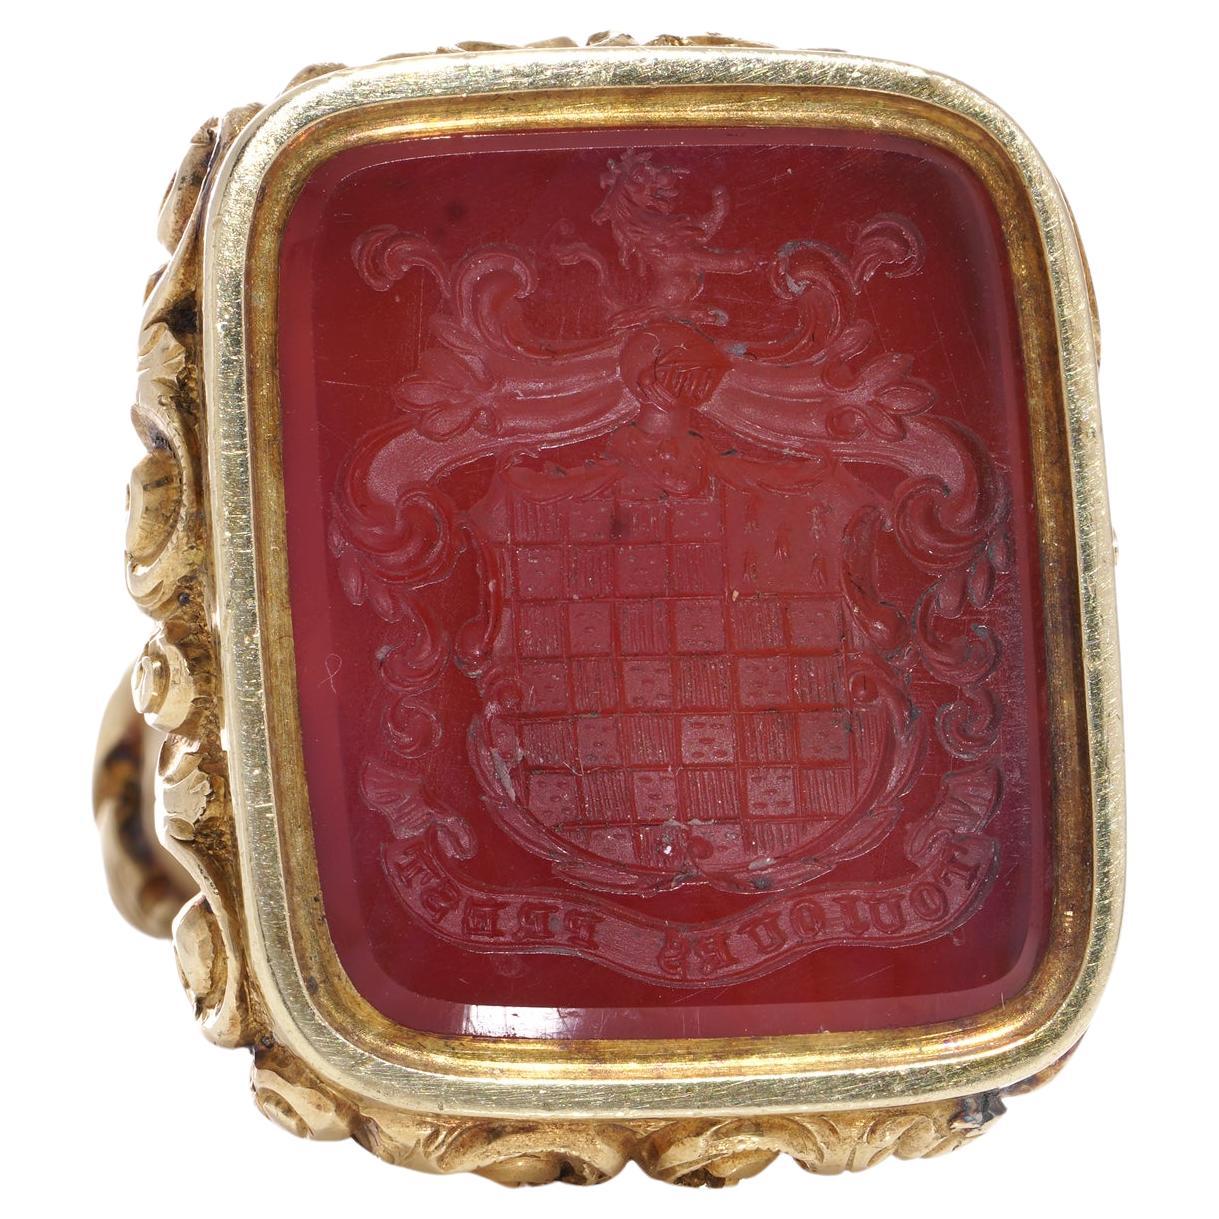 This antique 19th-century seal fob/pendant, crafted from 15kt. yellow gold features a Carnelian intaglio depicting what is possibly the crest of the Carmichael family or clan, along with the French phrase 'Toujours Prest,' which translates to